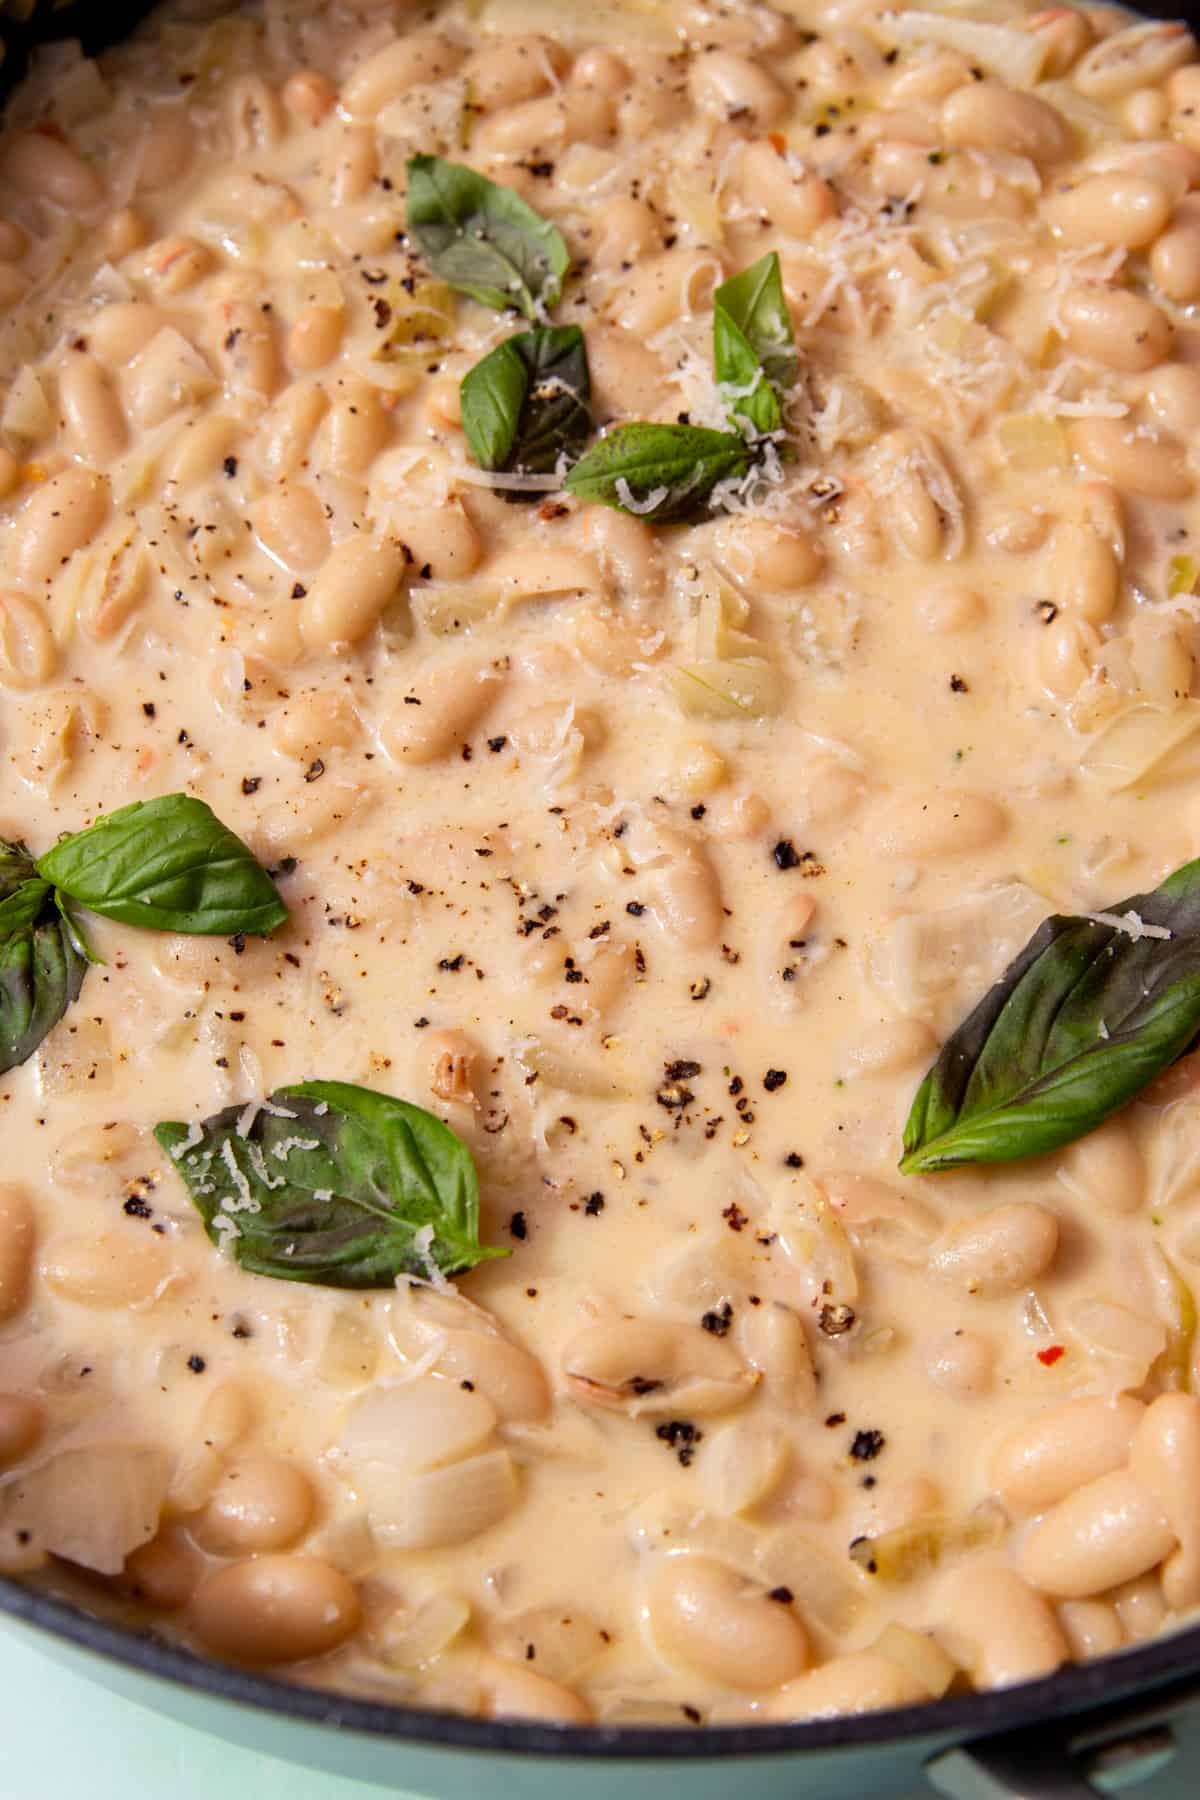 A close up of creamy cannellini beans in a sauce with fresh basil leaves, grated cheese and chilli flakes in a pan.